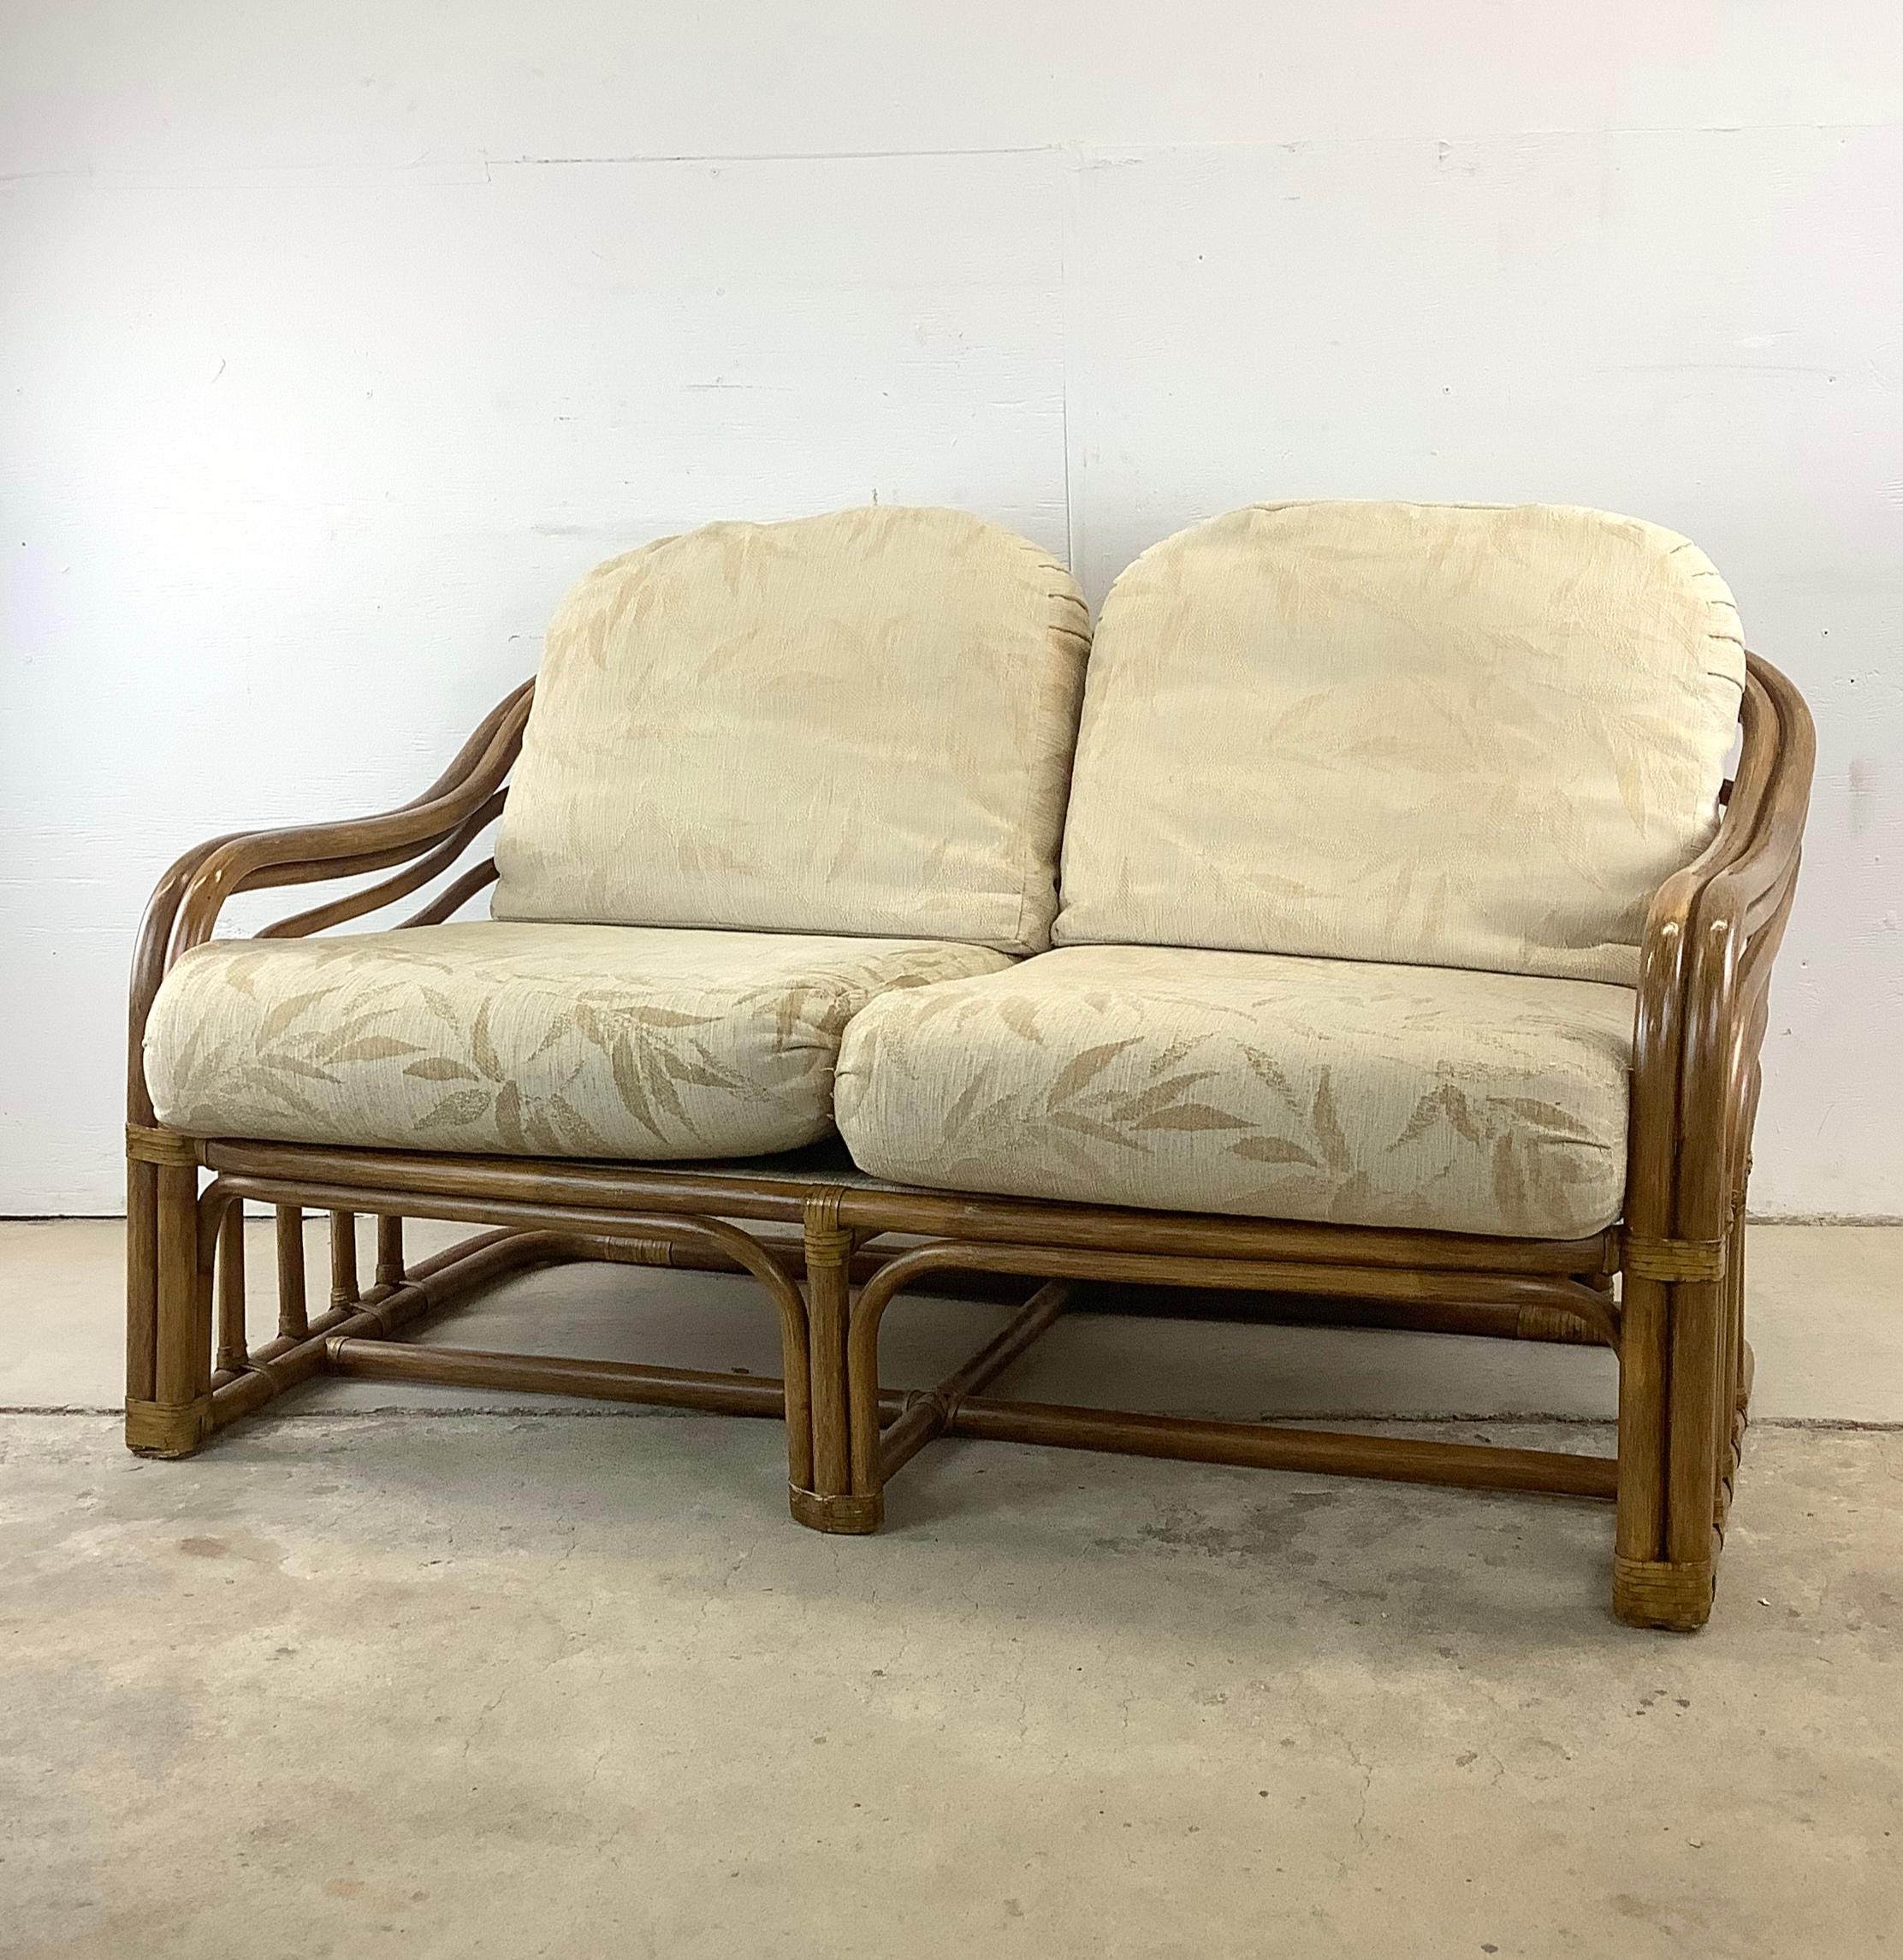 Embrace the charm of cozy, intimate seating with this vintage coastal rattan loveseat after Brown Jordan, a piece that perfectly marries comfort with compact elegance. This loveseat, with its inviting bentwood rattan frame and plush upholstery, is